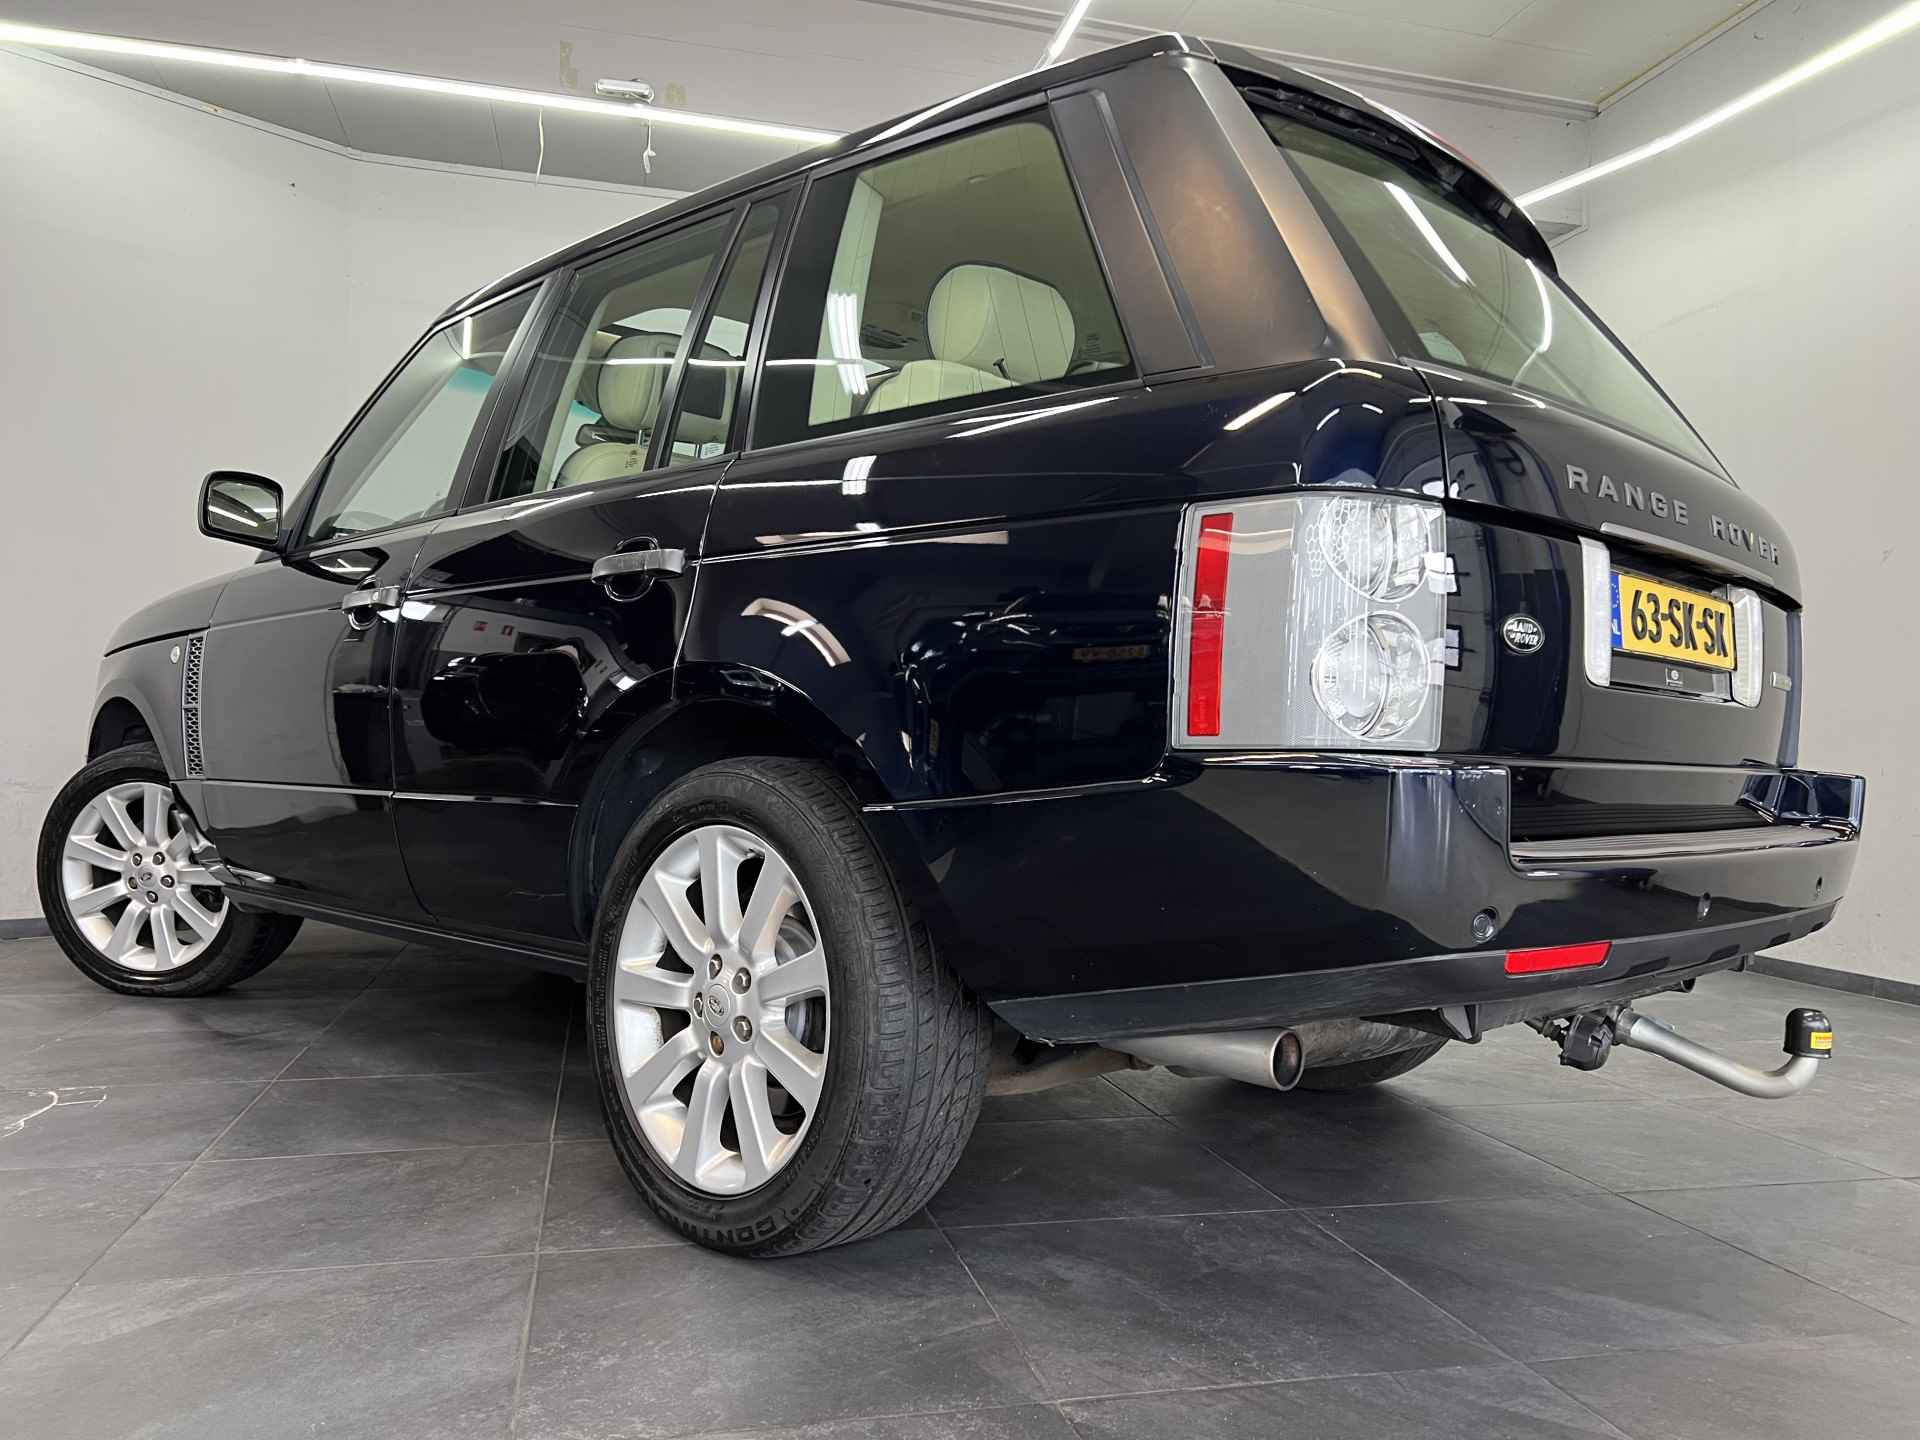 Land Rover Range Rover 4.2 V8 Supercharged ✅UNIEKE STAAT✅Airco✅Cruise controle✅Navigatie✅5 deurs✅TREKHAAK - 10/52